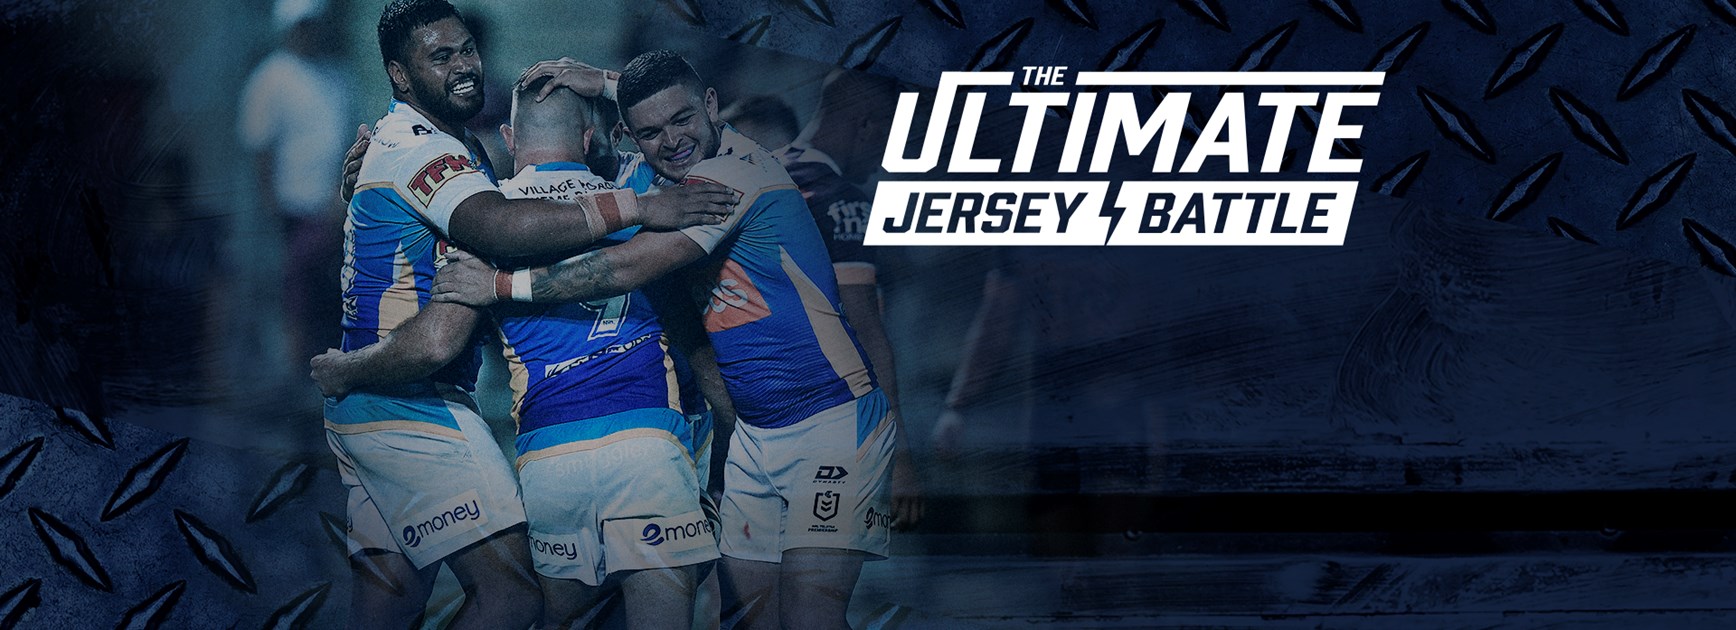 GAME 6: Voting Now Open In Titans Jersey Battle